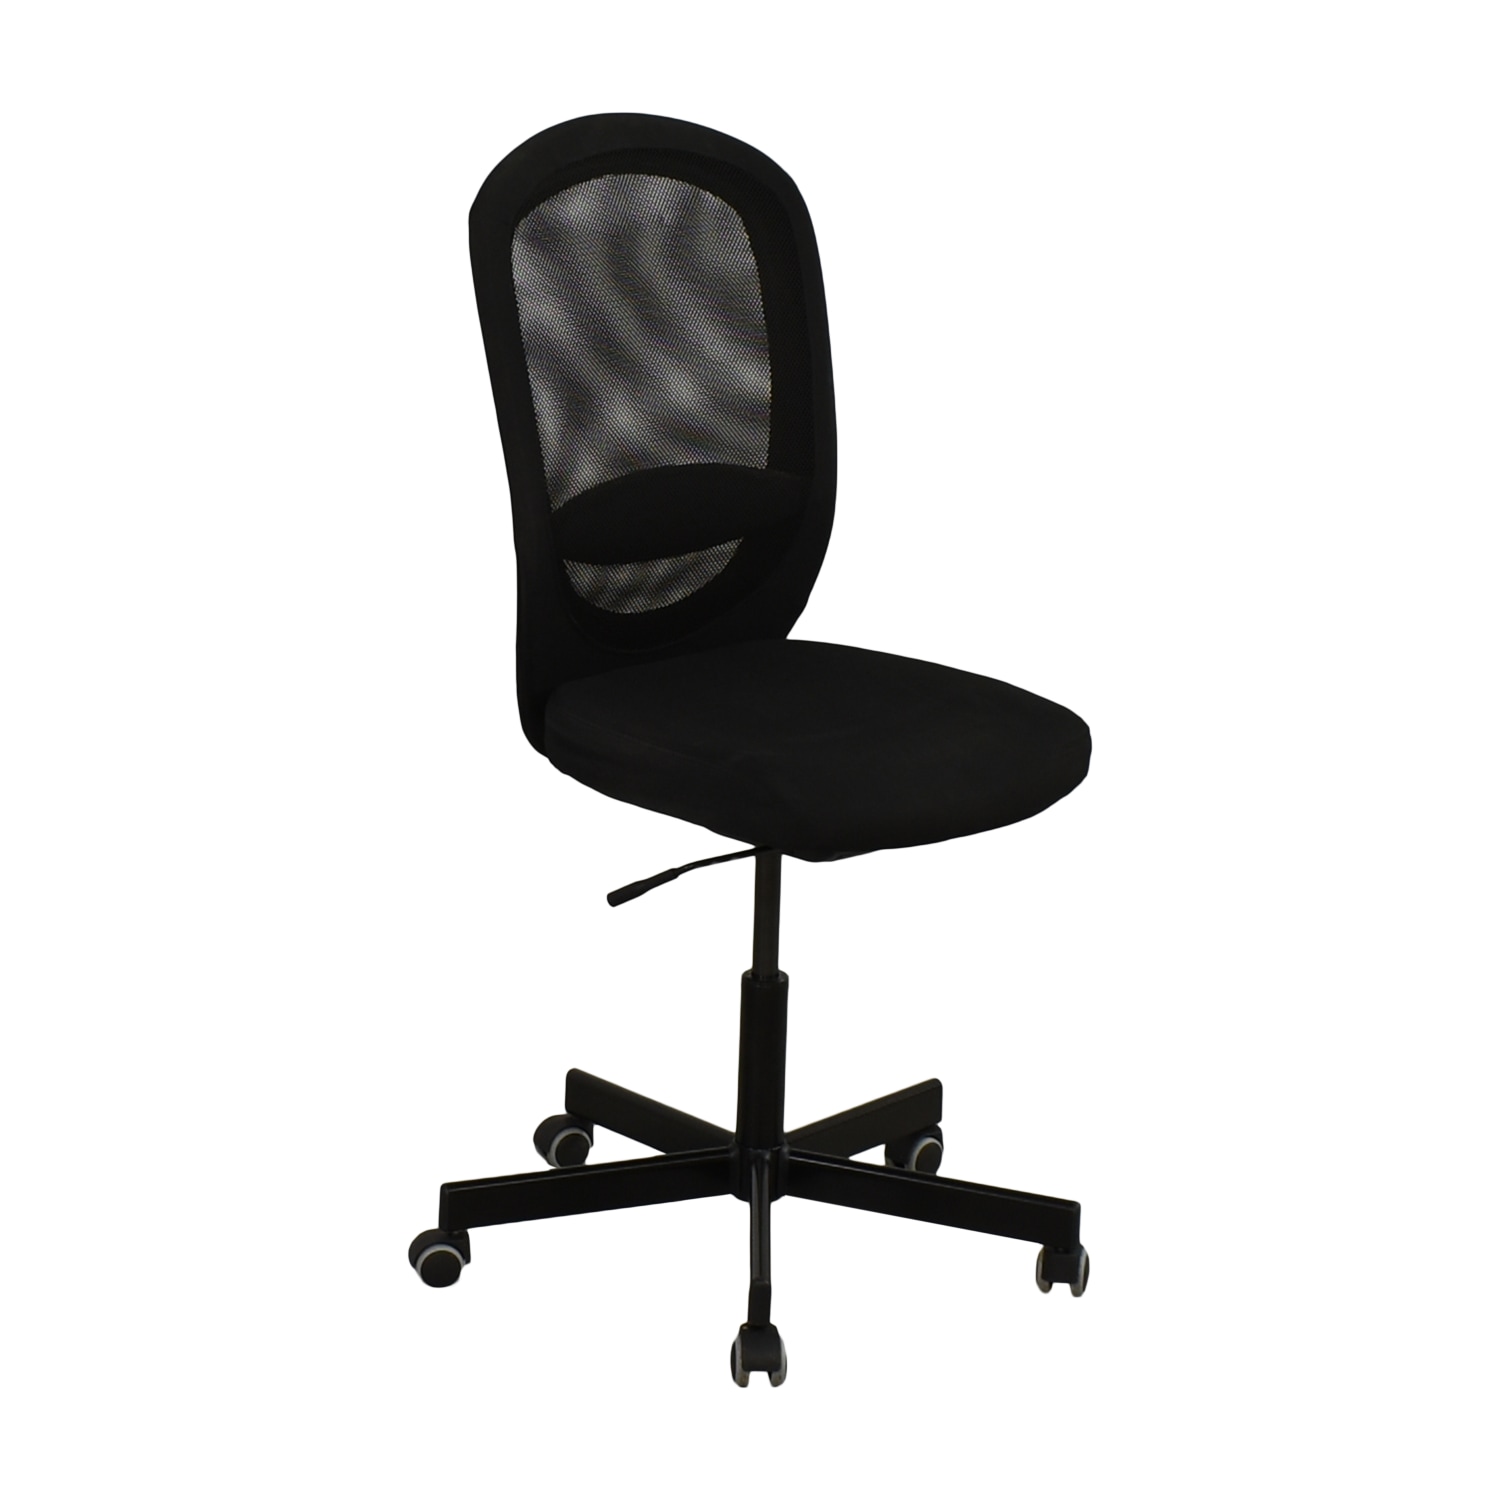 https://res.cloudinary.com/dkqtxtobb/image/upload/f_auto,q_auto:best,w_1500/product-assets/382071/ikea/chairs/home-office-chairs/sell-ikea-flintan-office-chair.jpeg